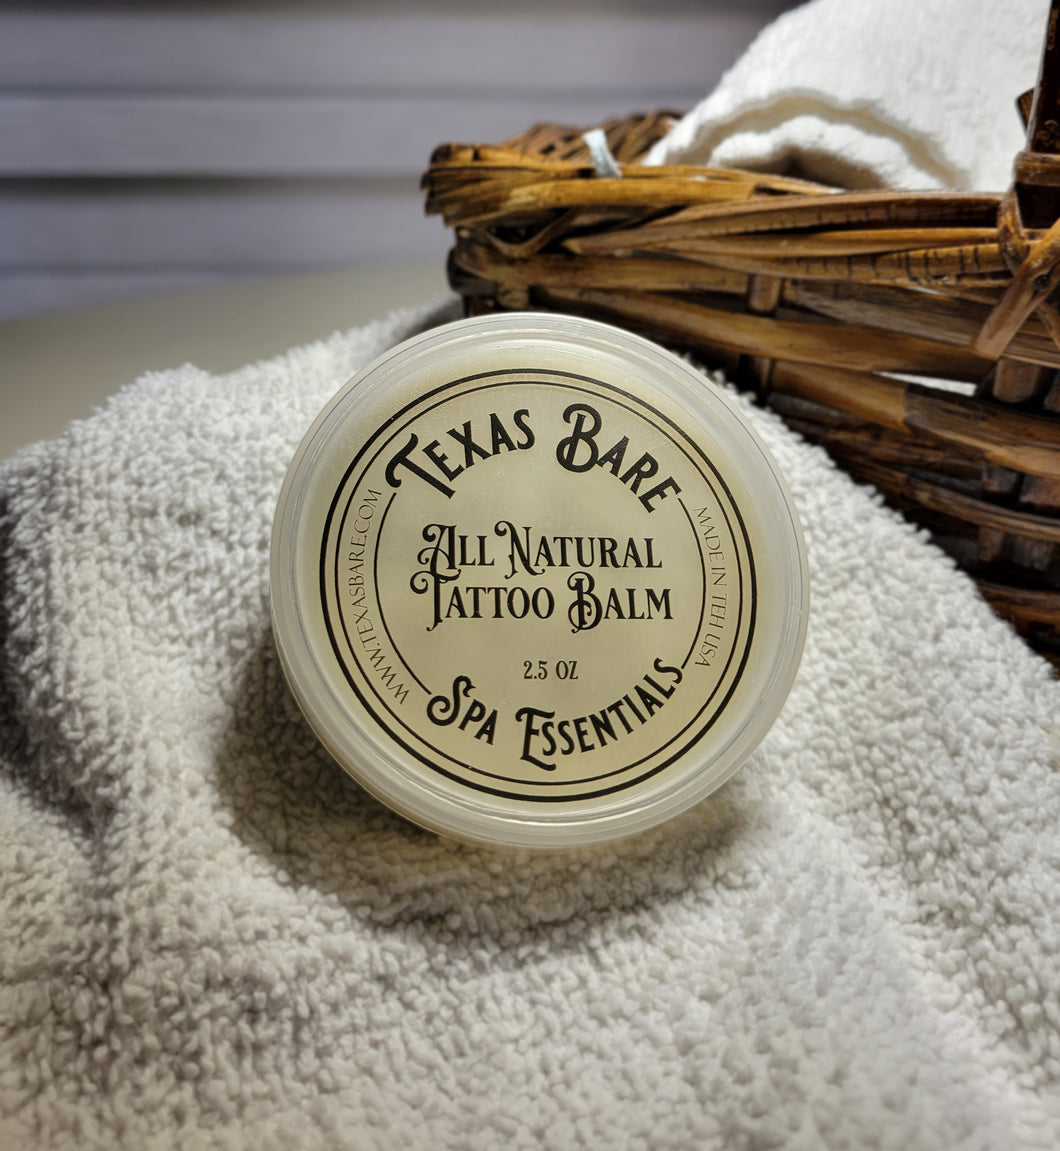 All Natural and Unscented Tattoo Balm